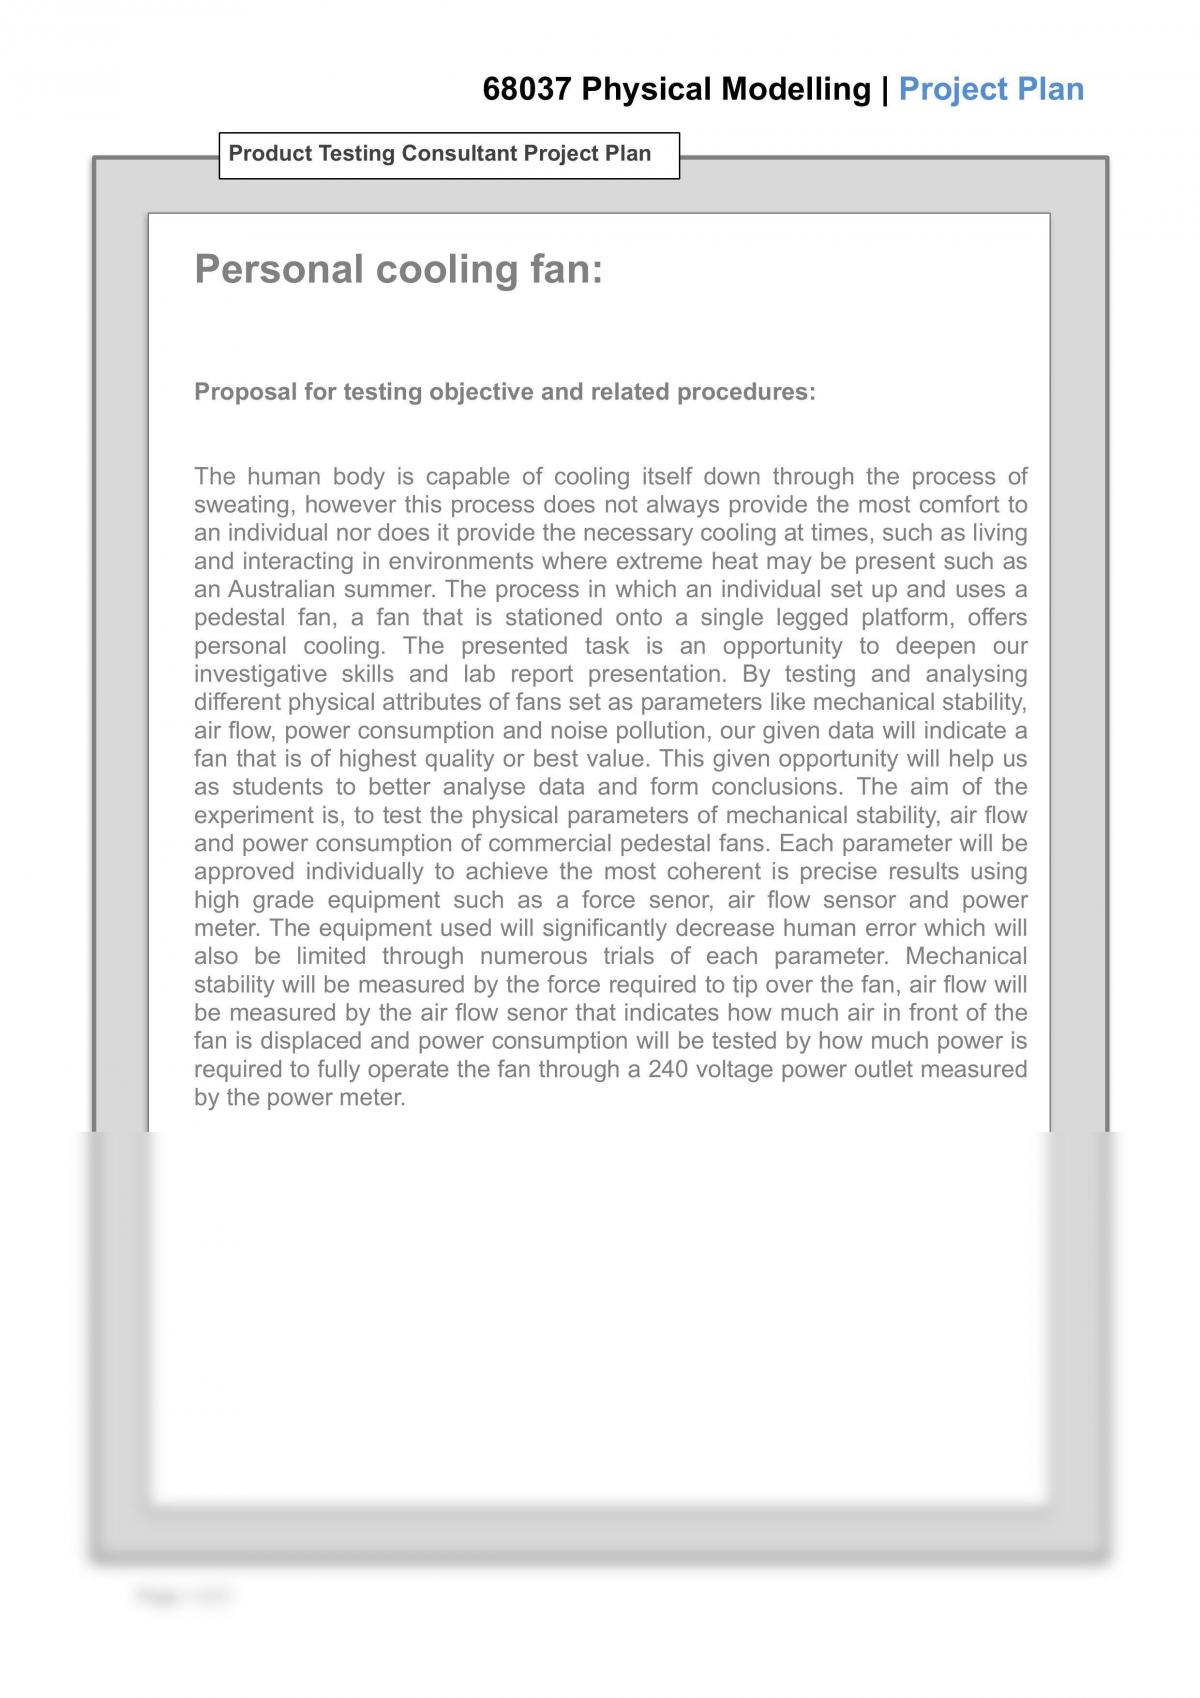 Personal cooling fan project plan - Page 1